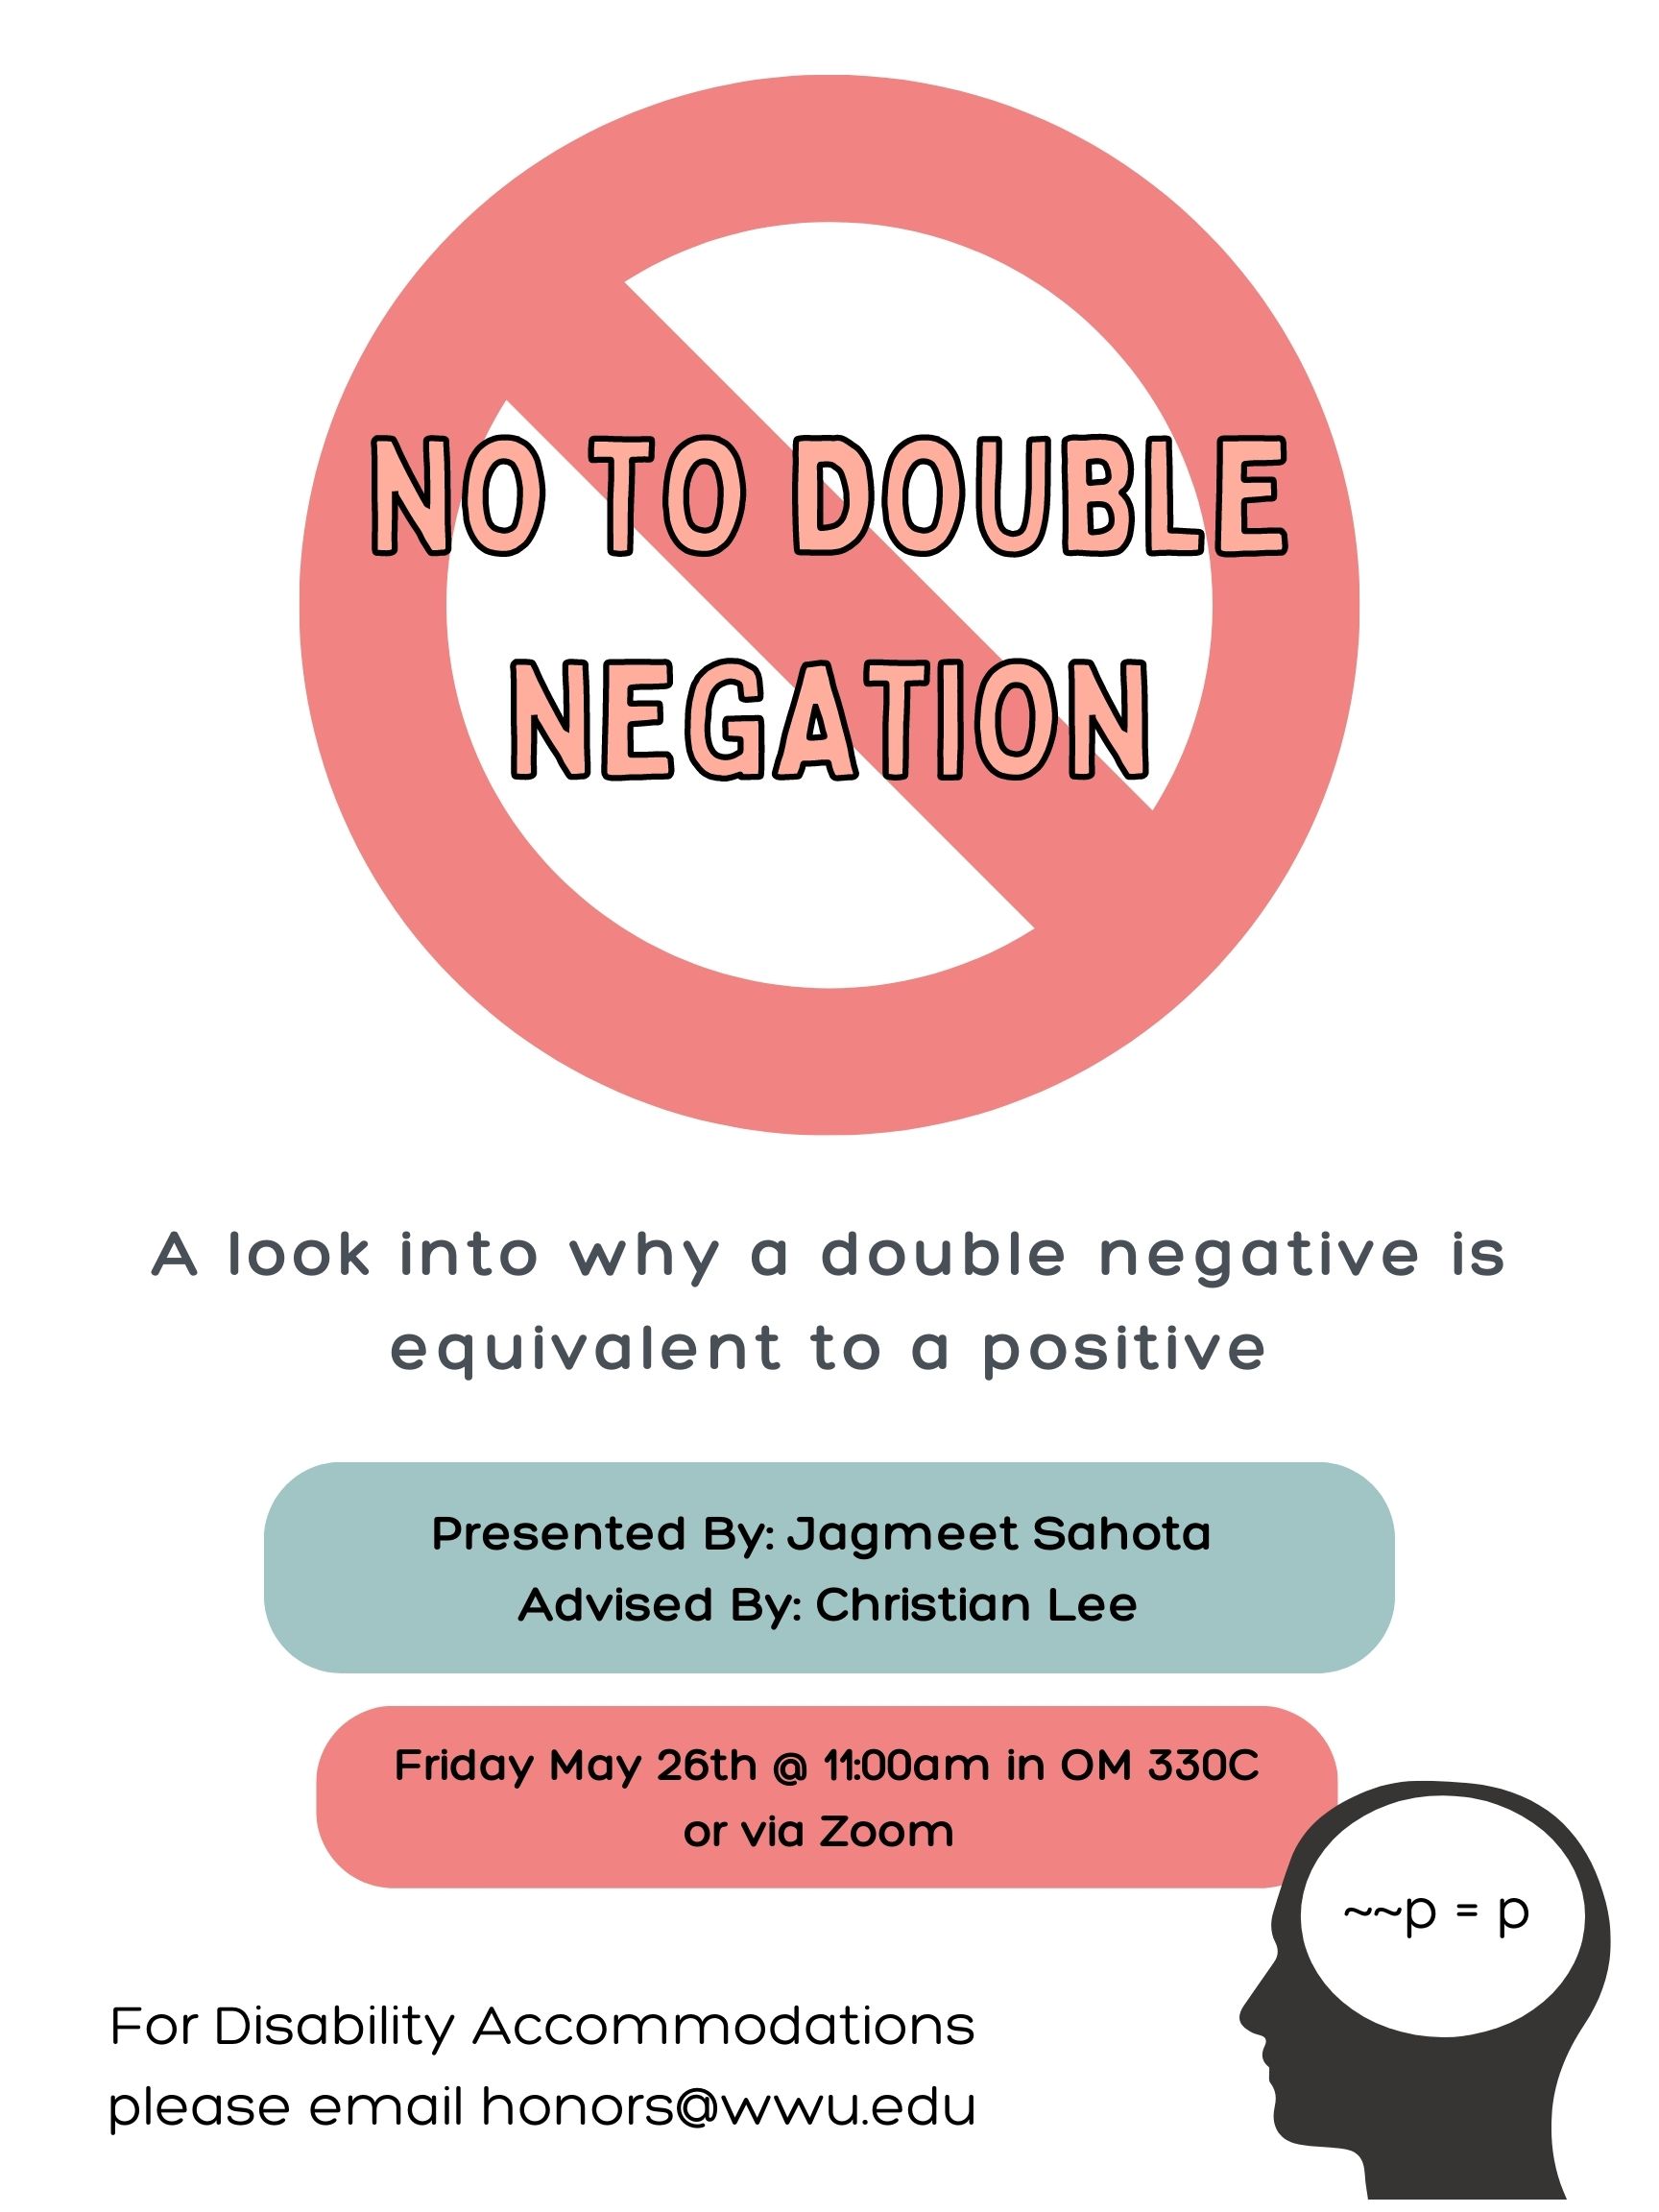 A white poster with a red no symbol, two colored boxes, and a silhouette of a person's head with text that reads "~~p = p." Other text reads: “No to Double Negation: A look into why a double negative is equivalent to a positive. Presented By: Jagmeet Sahota, Advised By: Christian Lee. Friday May 26th @ 11:00am in OM 330C or via Zoom. For Disability Accommodations please email honors@wwu.edu”.